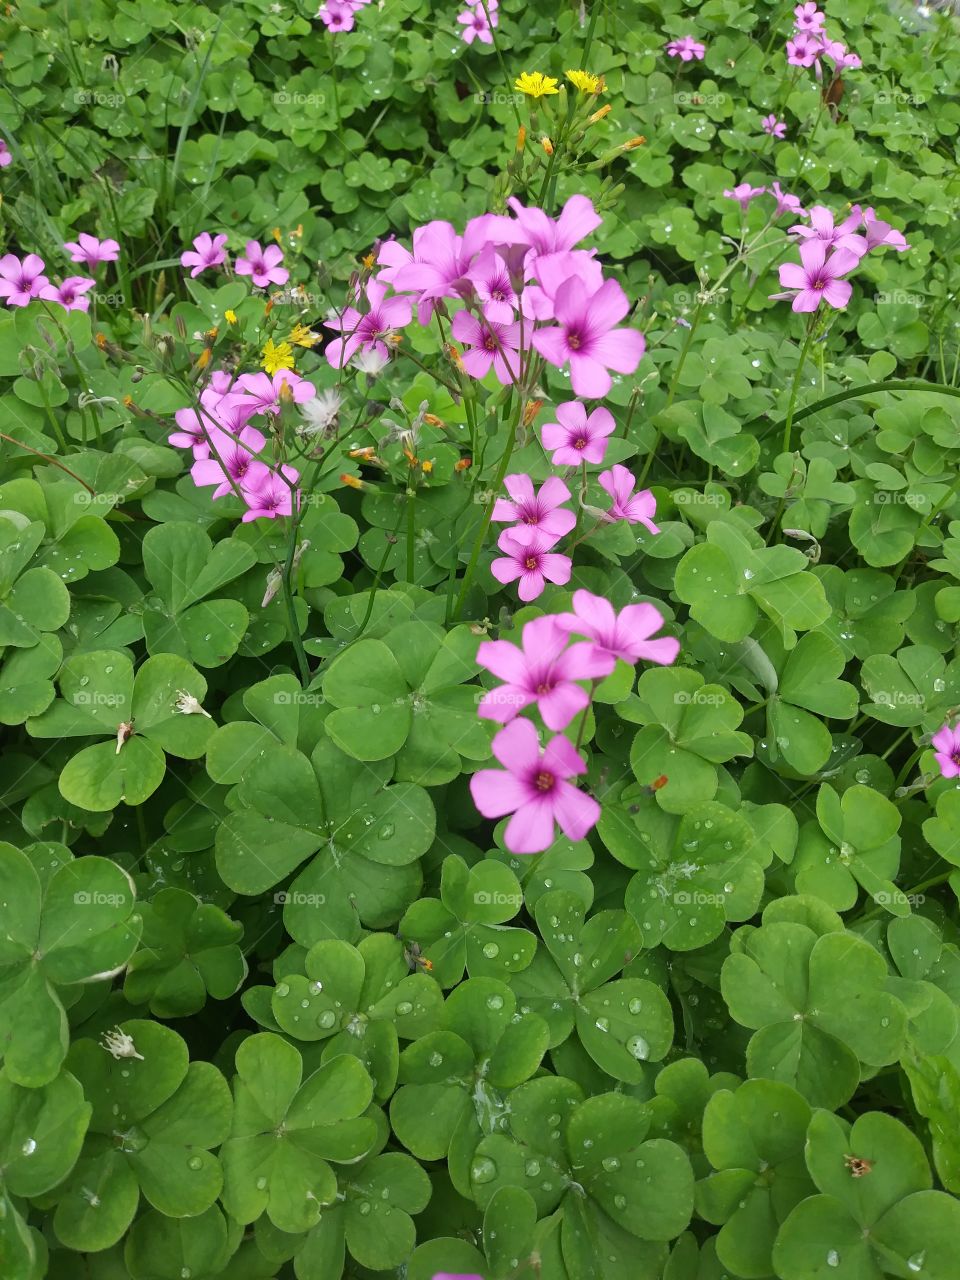 purple flowers and clovers